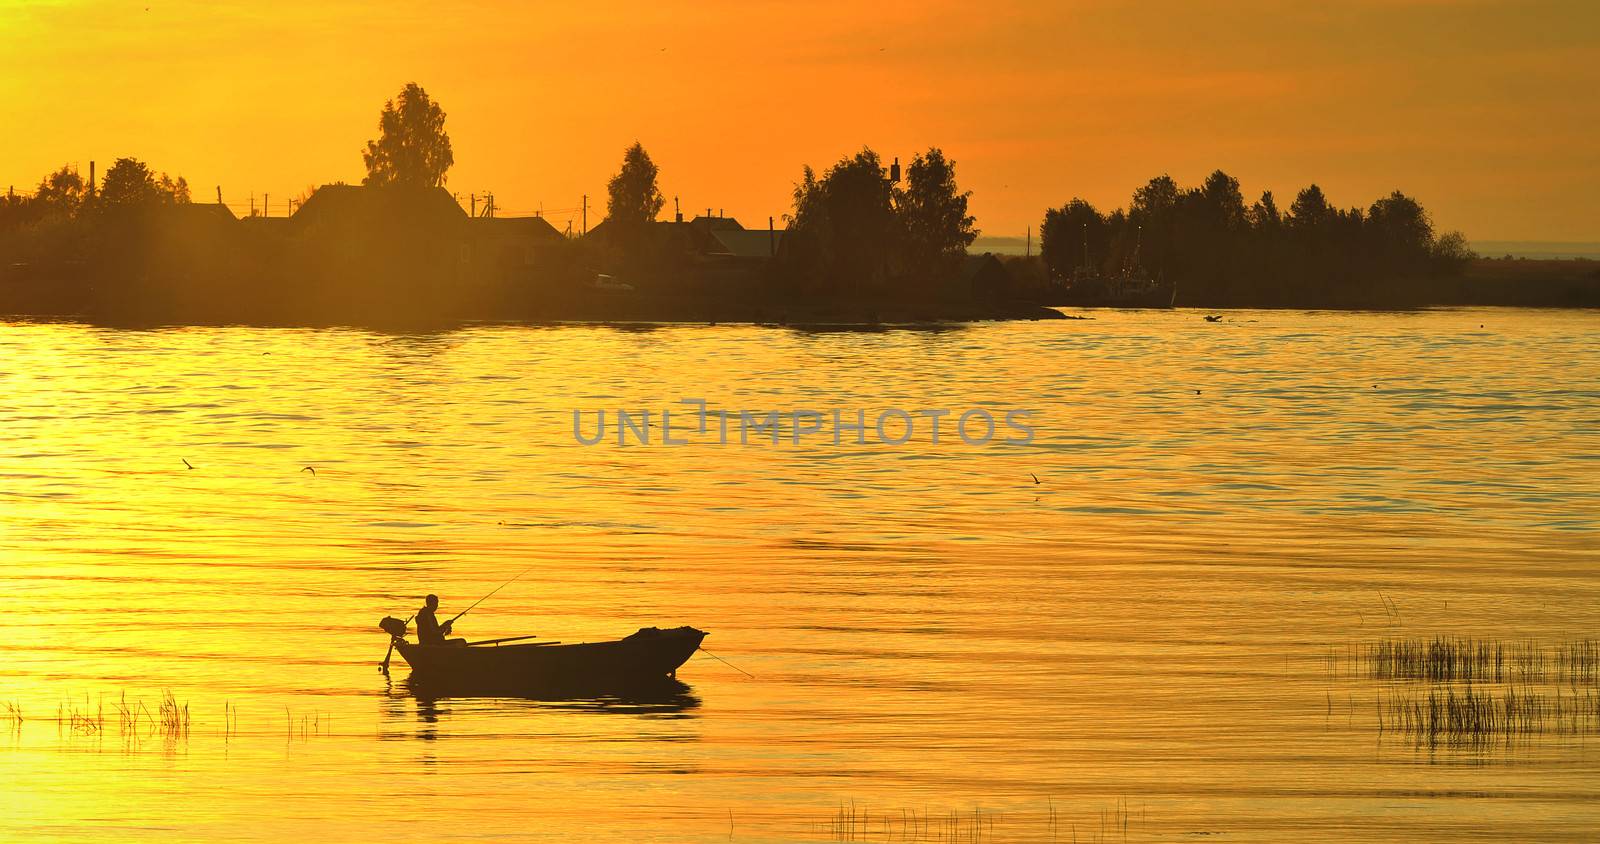 The boat with the fisherman at sunset